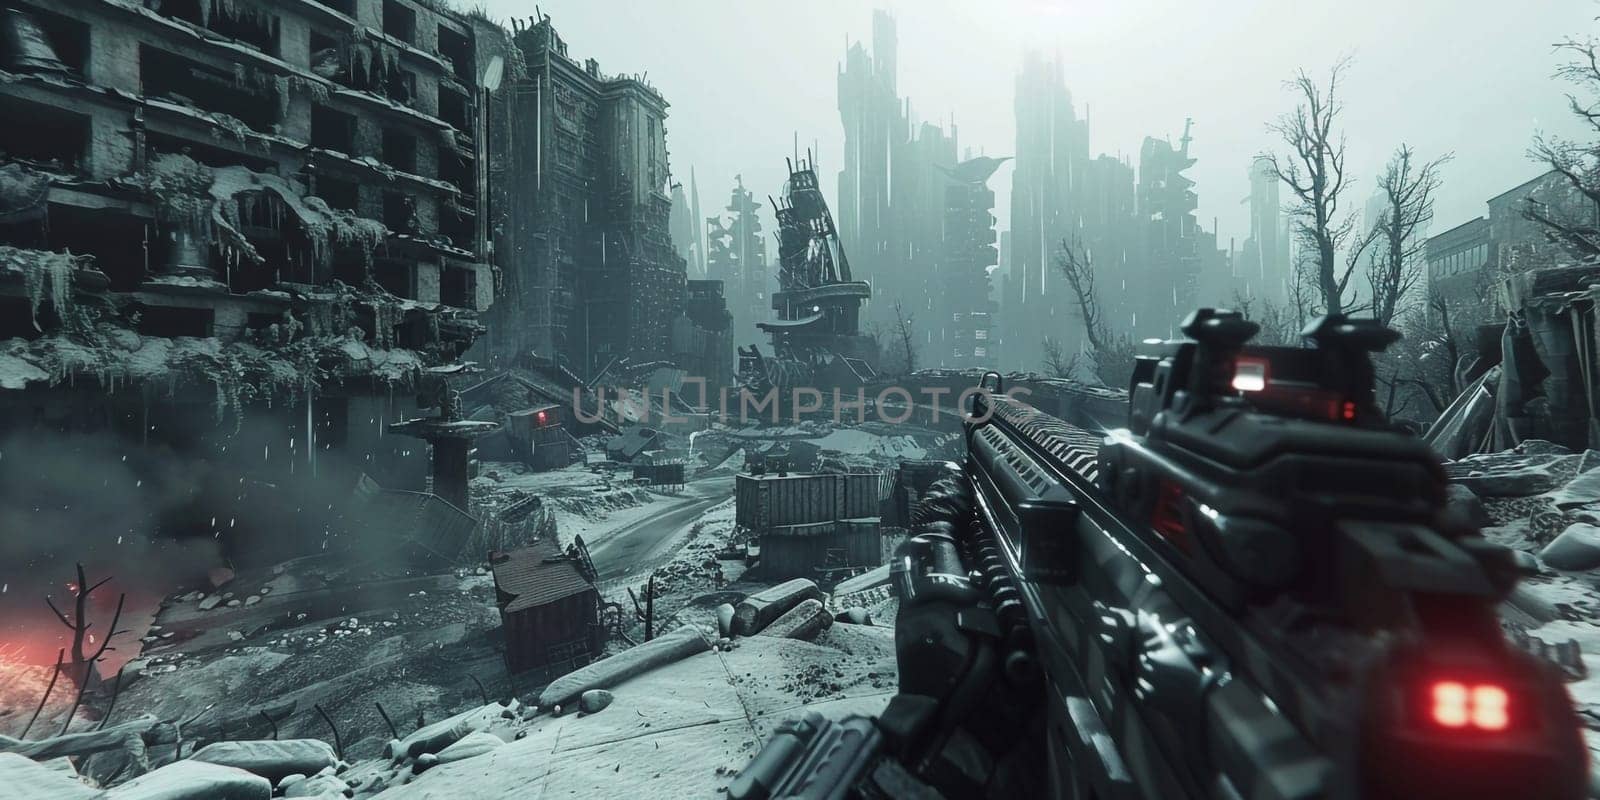 Post-apocalyptic world, a soldier wearing unique anti-nuclear armor stands with a conceptual rifle amidst the ruins of a city destroyed by nuclear war. High quality photo